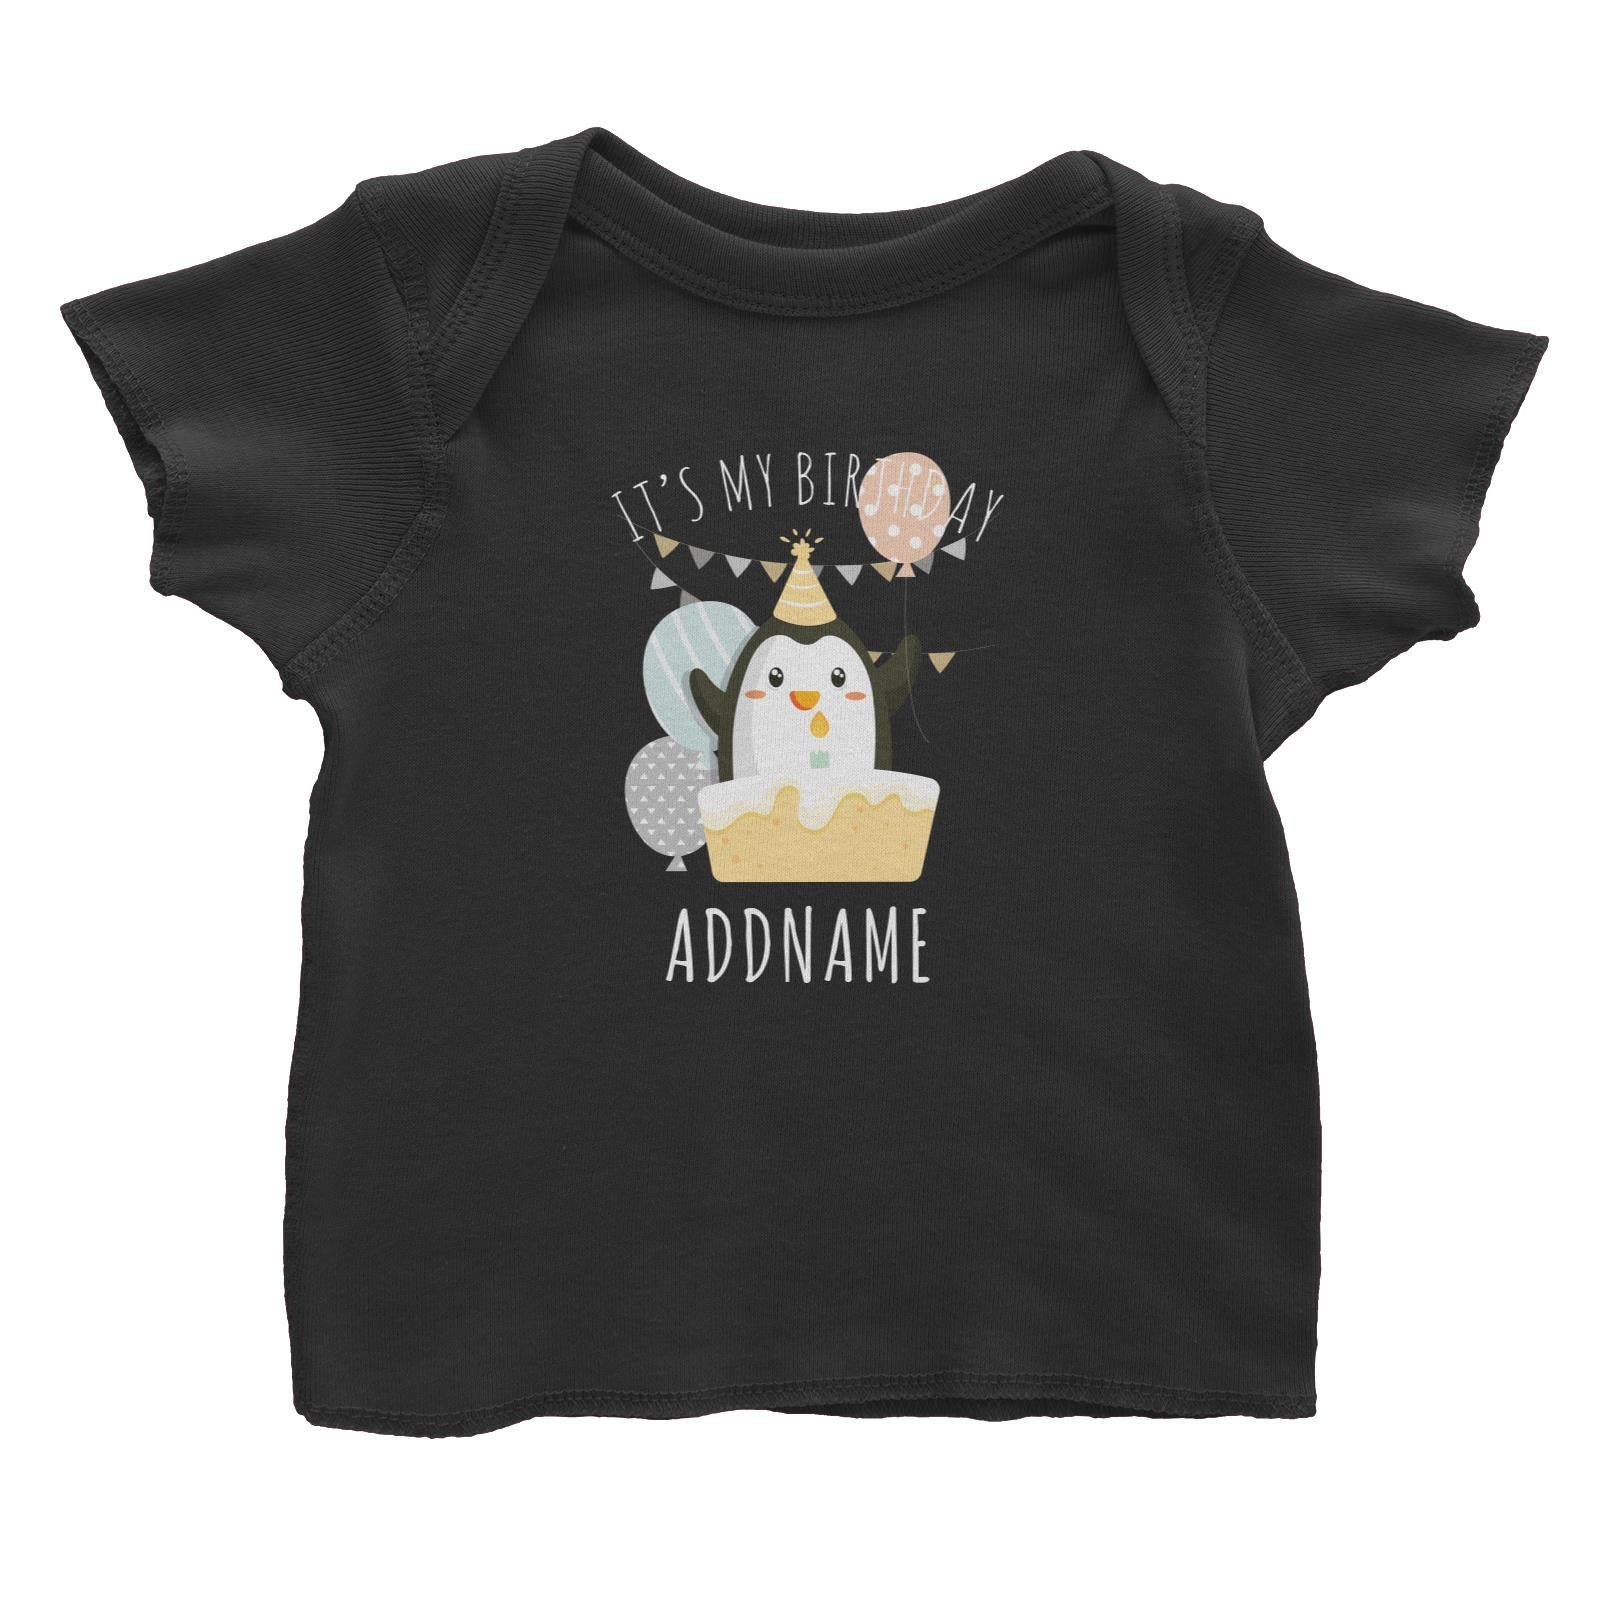 Birthday Cute Penguin And Cake It's My Birthday Addname Baby T-Shirt